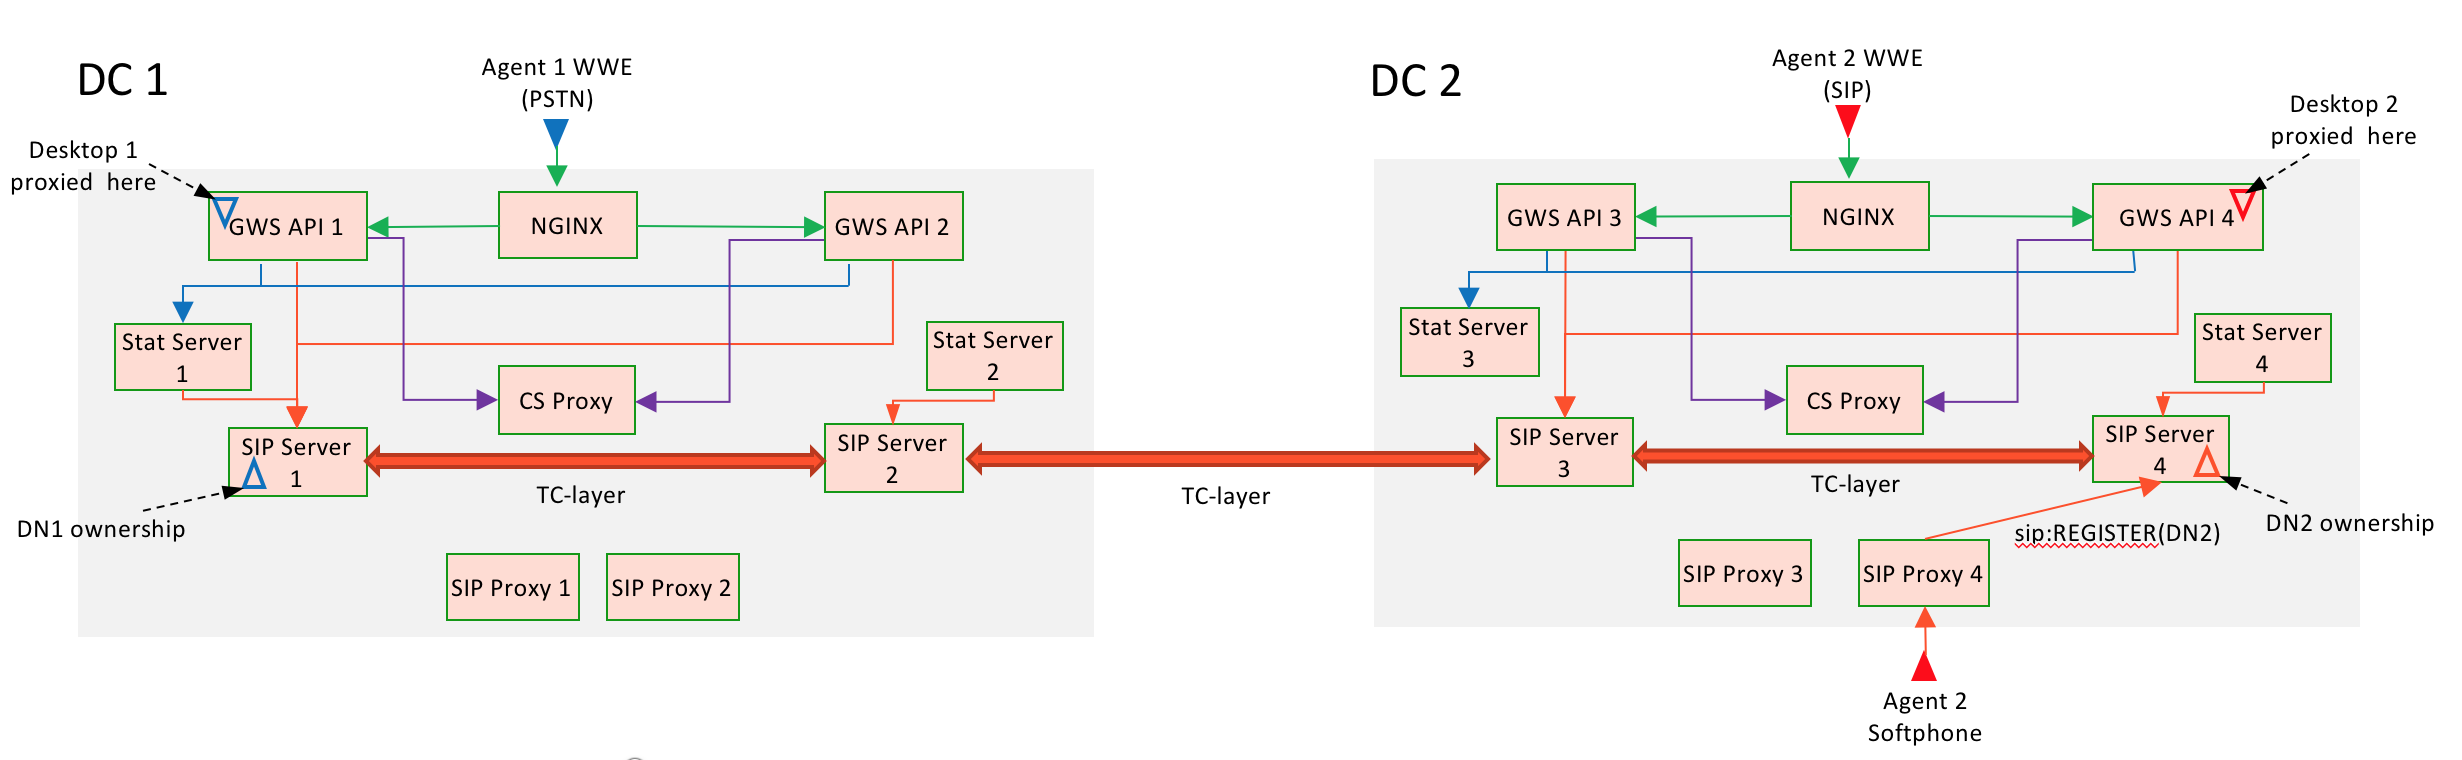 Gws sipcluster dc configuration.png